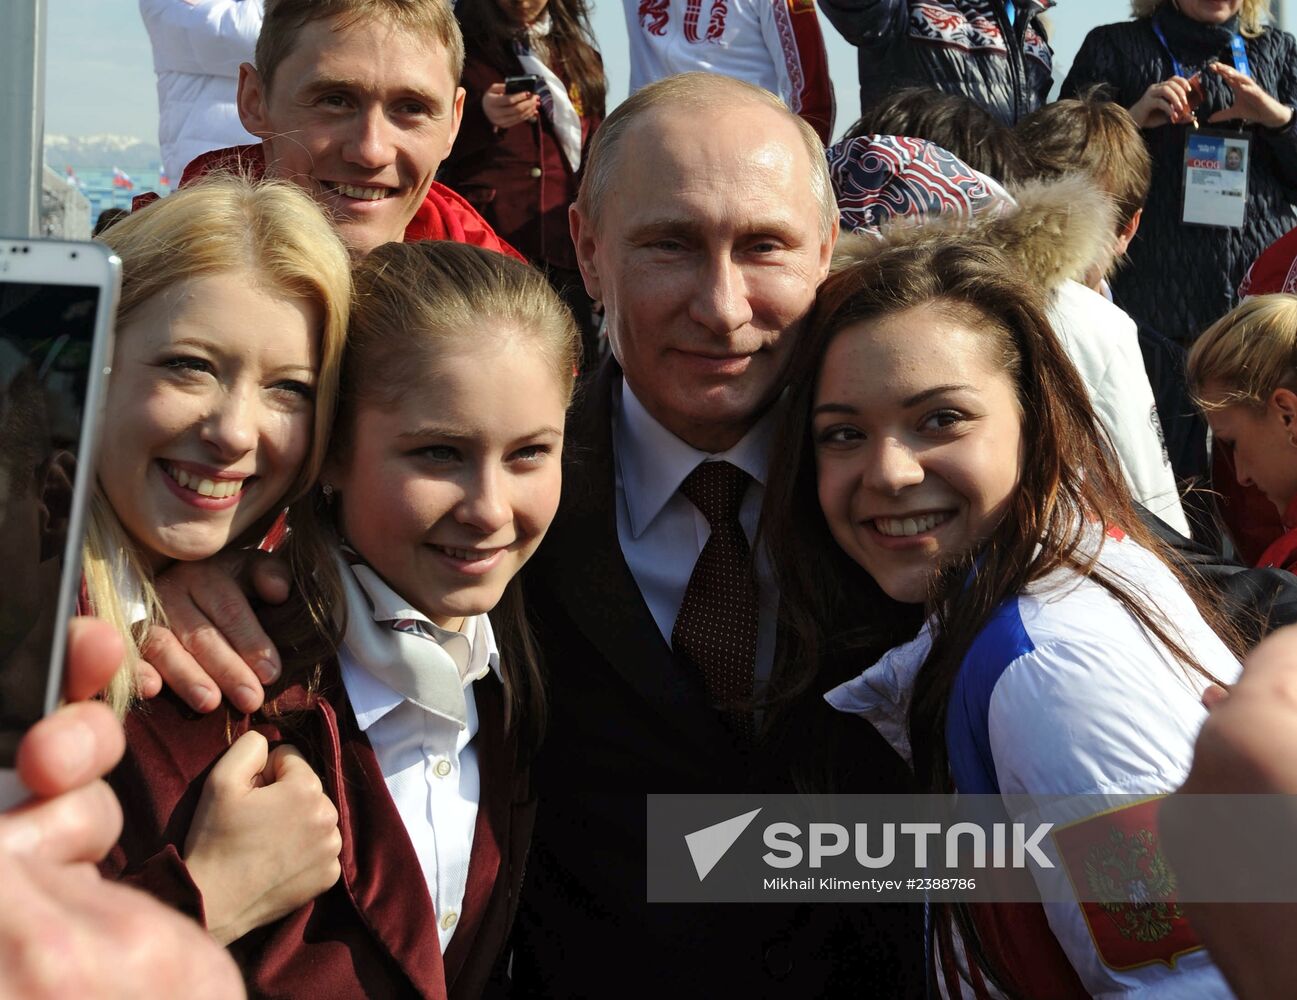 Vladimir Putin takes part in foundation of Alley of Winners at Sochi Olympic Park